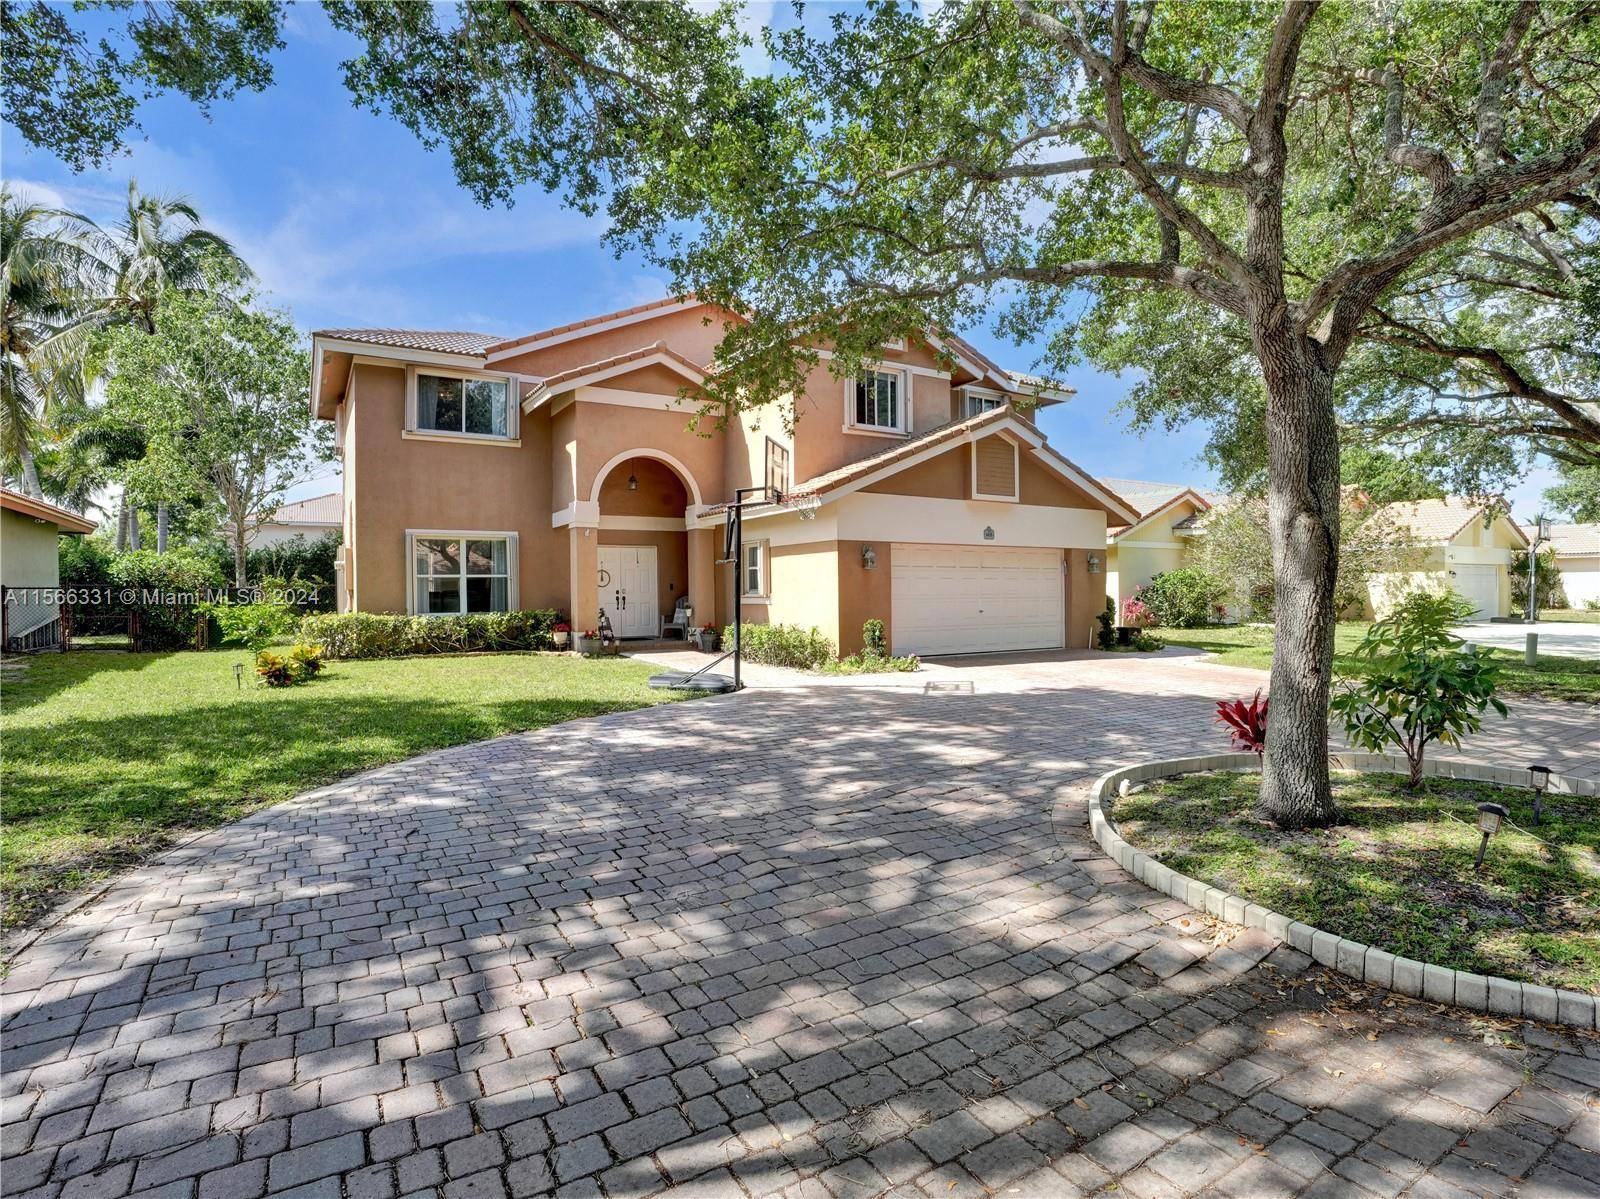 Home Sweet Home in the quiet enclave of Coconut Creek.